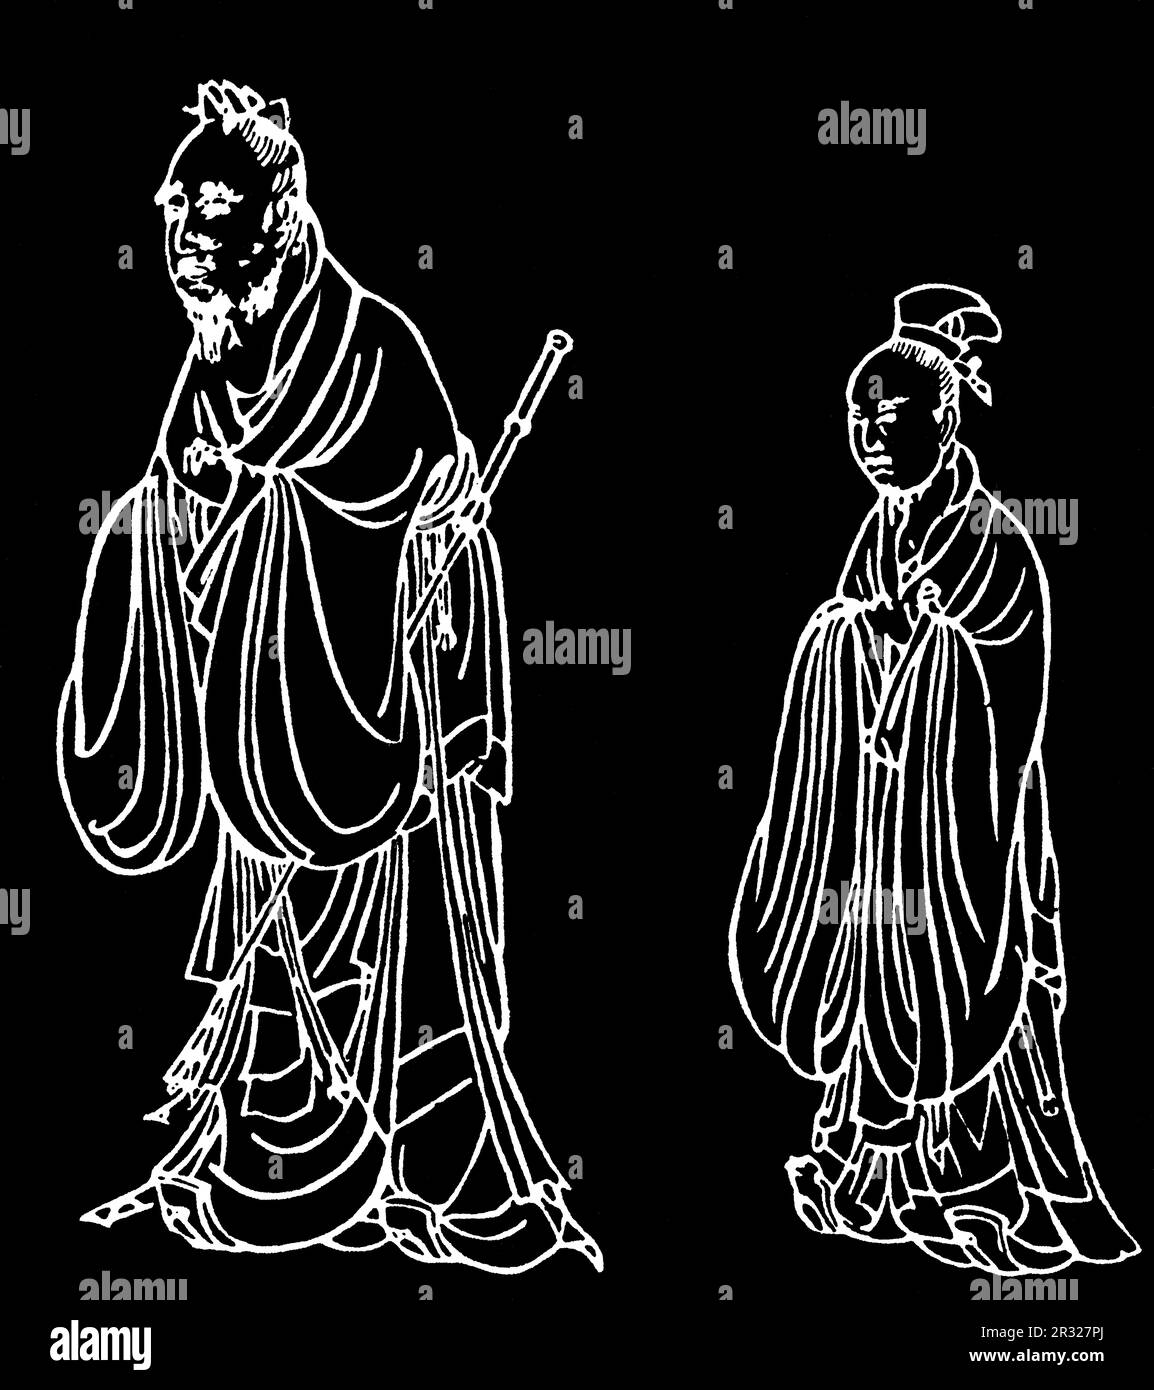 Confucius and Yan Hui, 1095. Confucius (c551-c479BC), was a Chinese philosopher and politician of the Spring and Autumn period. From a rubbing of an incised stone tablet sponsored by Kong Duanyou in the Temple of Confucius, Qufu, Shandong, China. Northern Song dynasty, 1095. Stock Photo